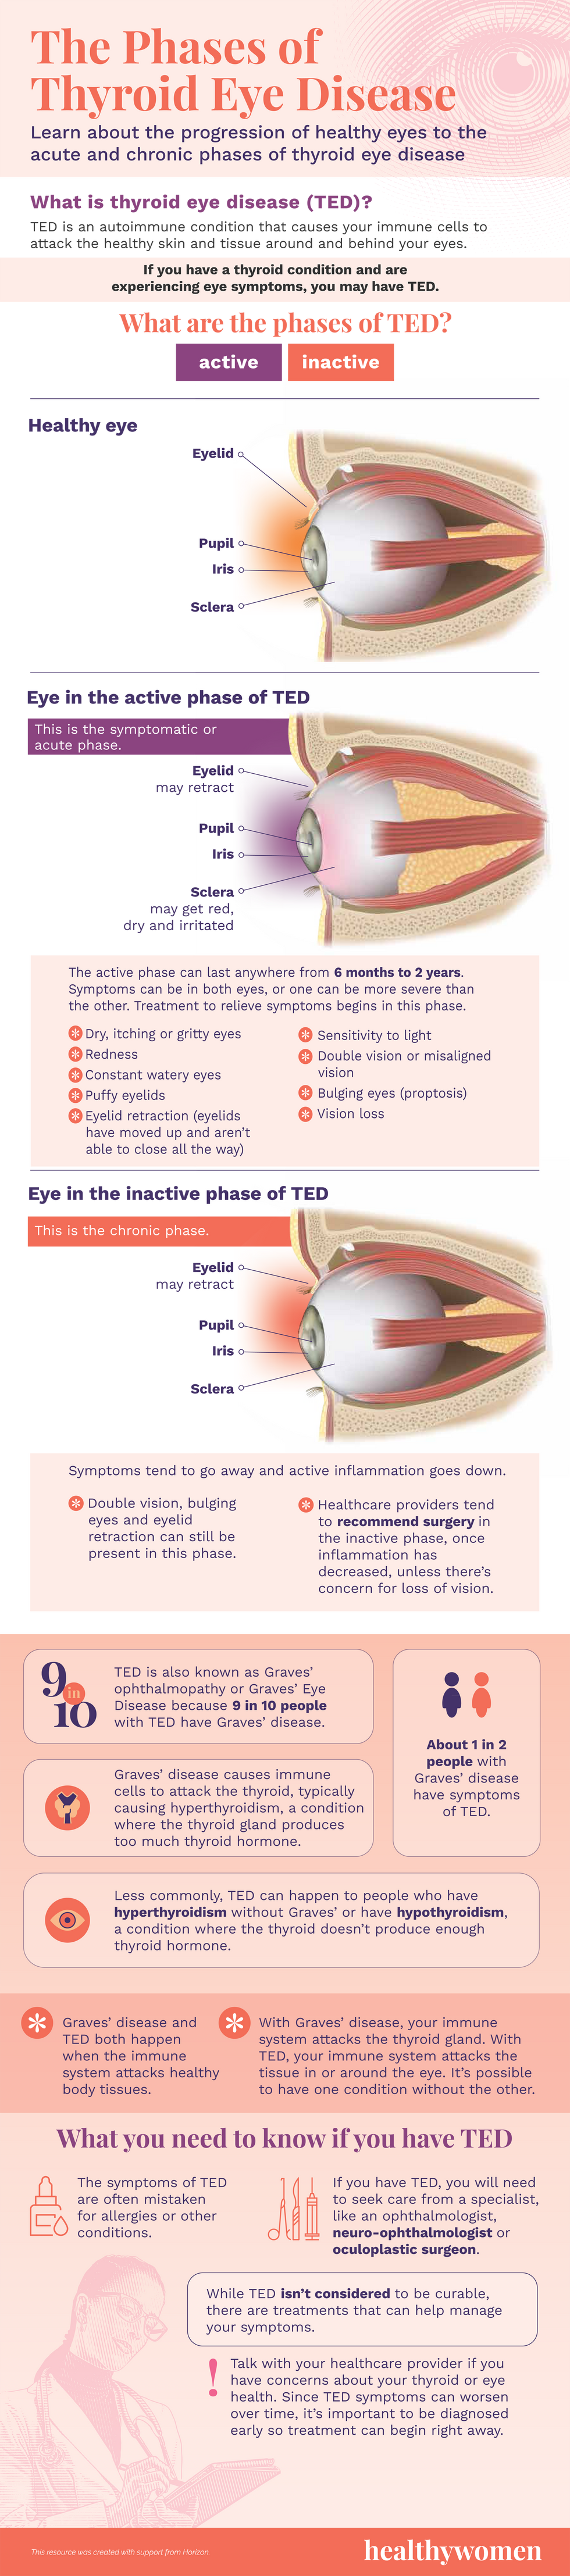 Infographic The Phases of Thyroid Eye Disease. Click the image to open the PDF